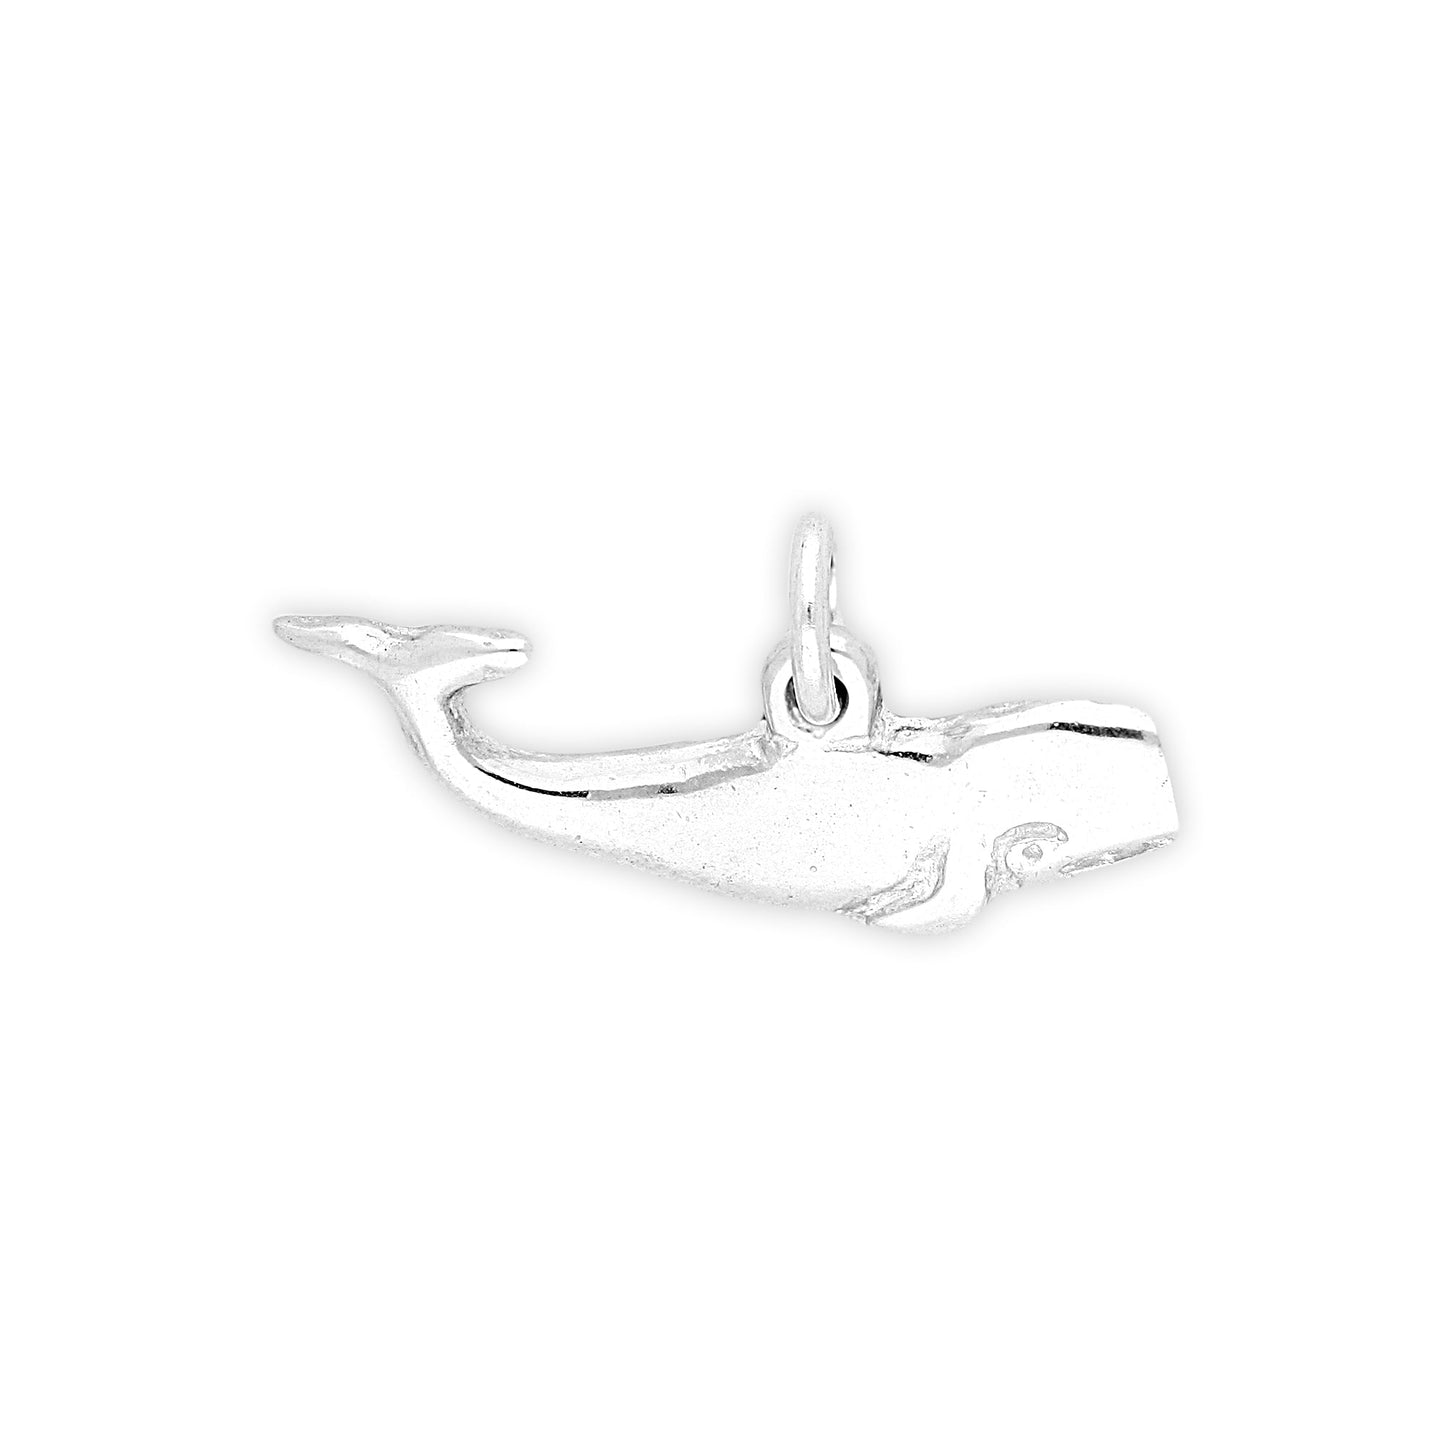 Sterling Silver Sperm Whale Charm